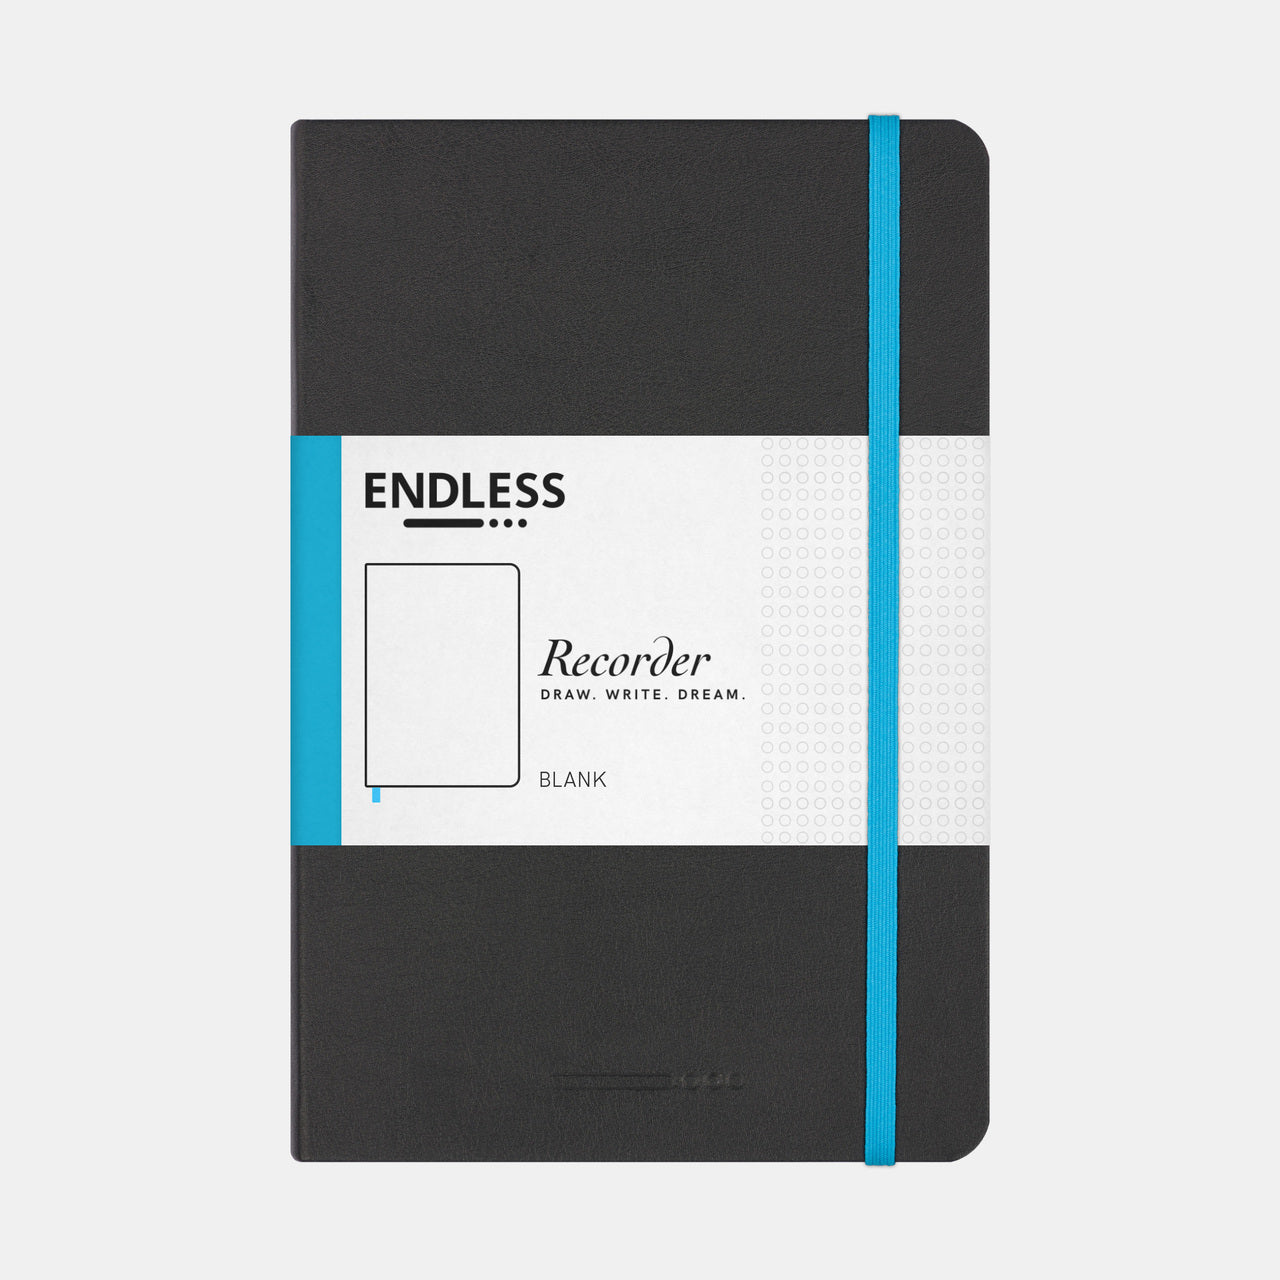 The Endless Recorder is available in four colors, and 4 paper styles.